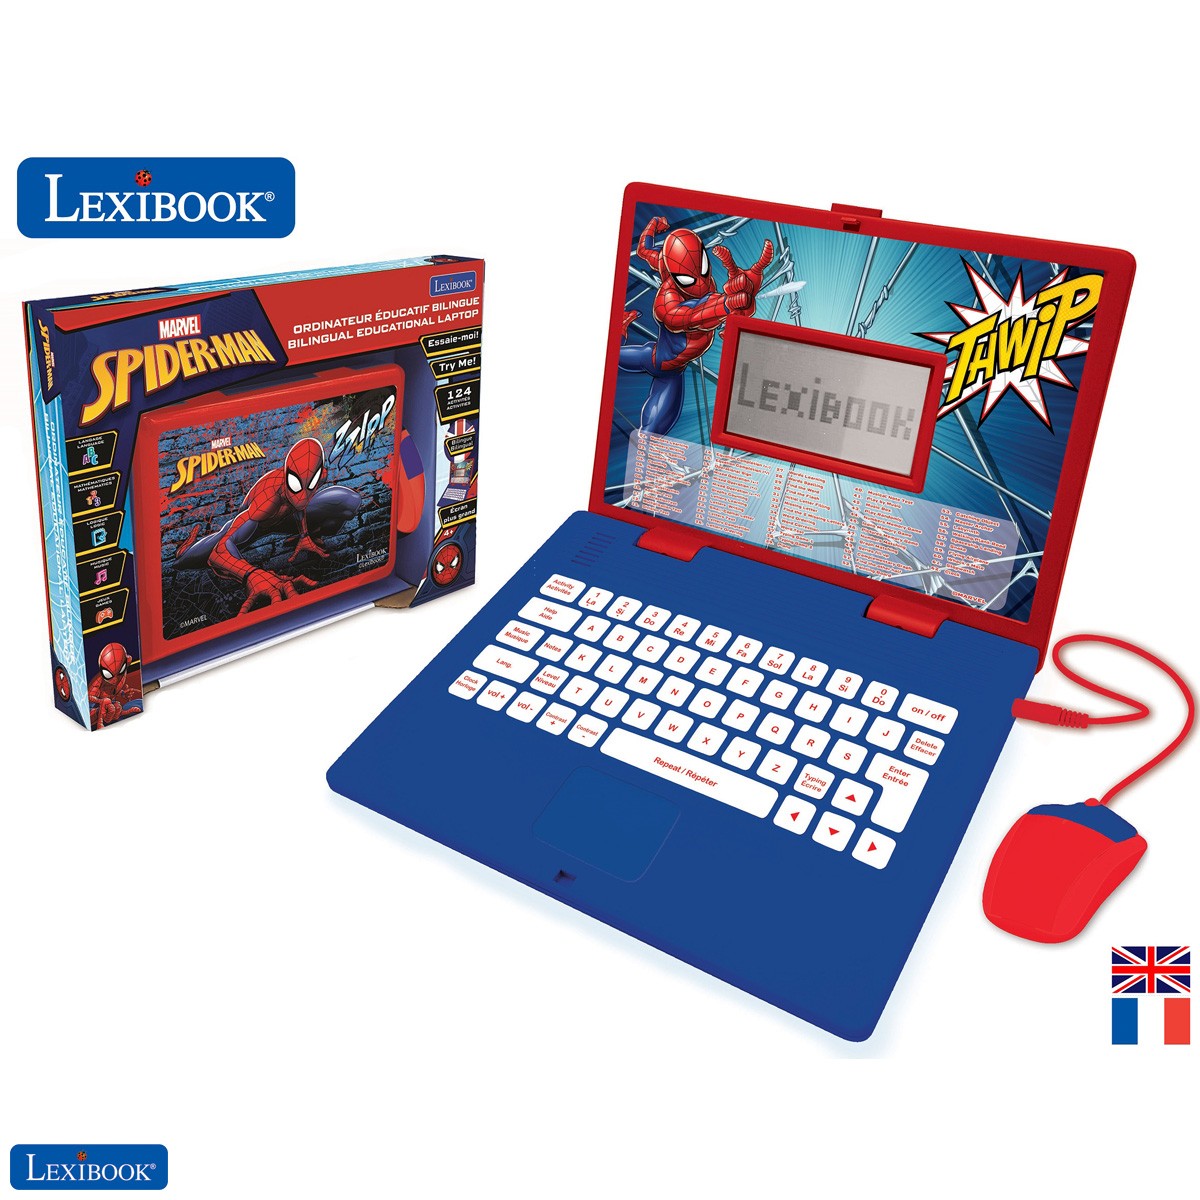 Disney Marvel Spider-Man - Educational and Bilingual Laptop French/English